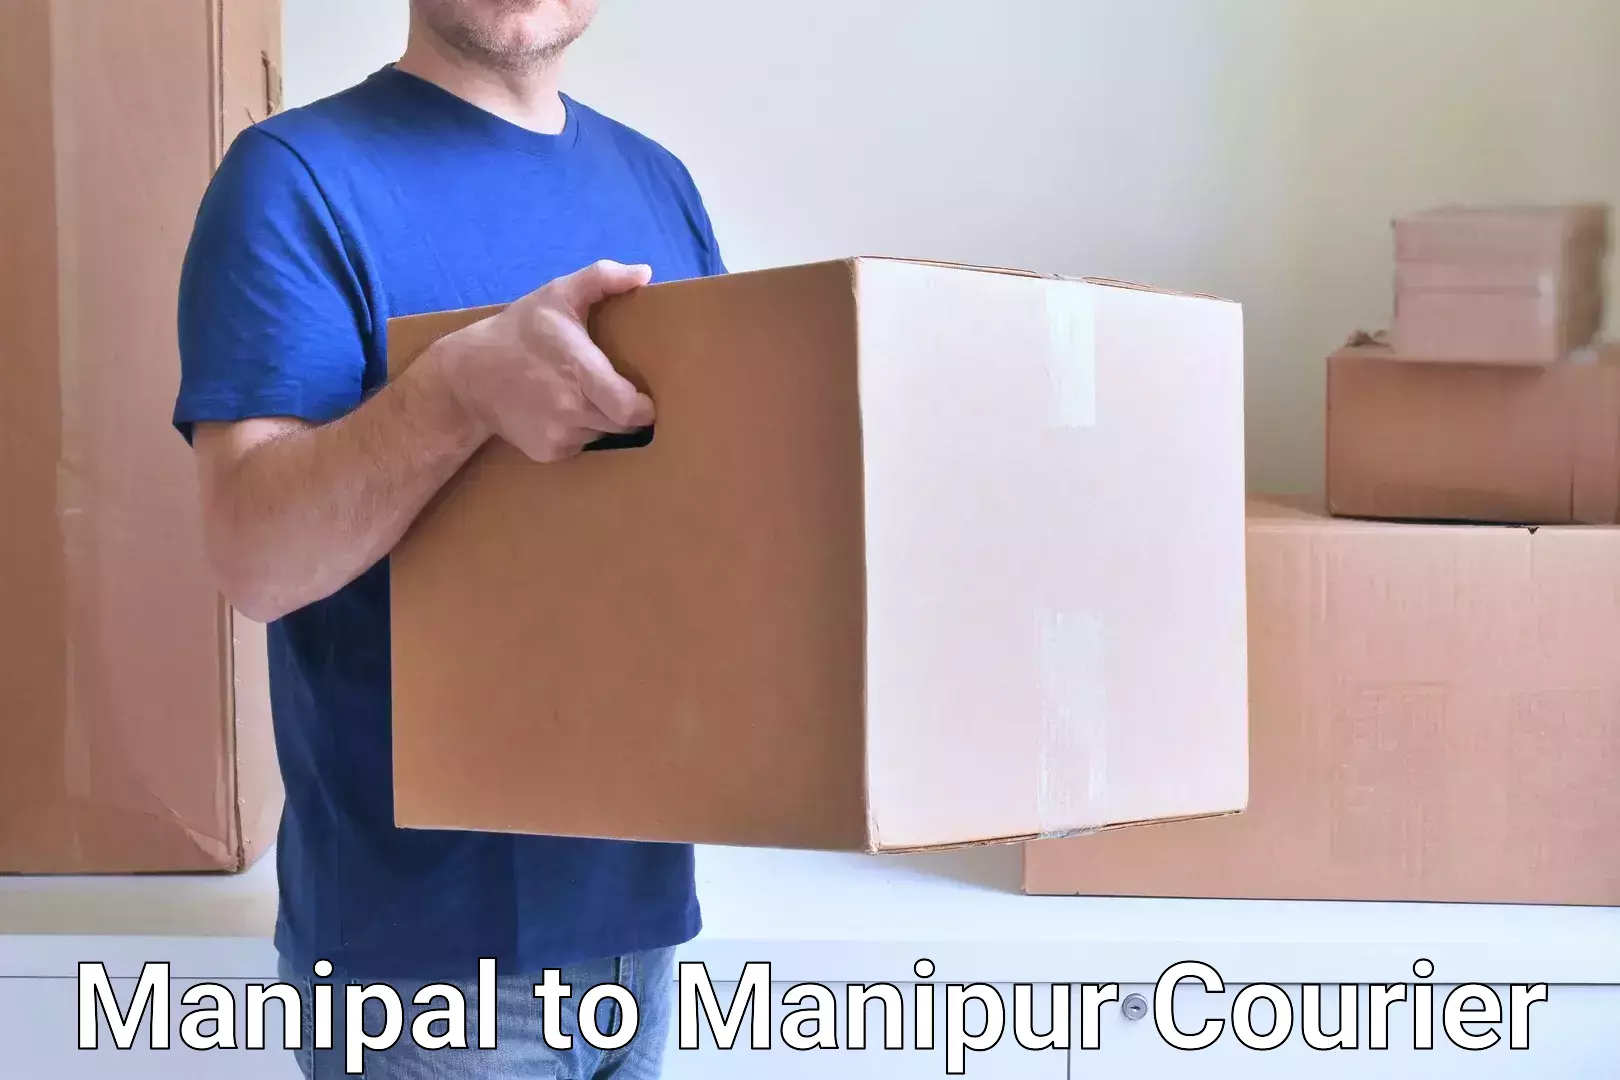 Cash on delivery service Manipal to Manipur